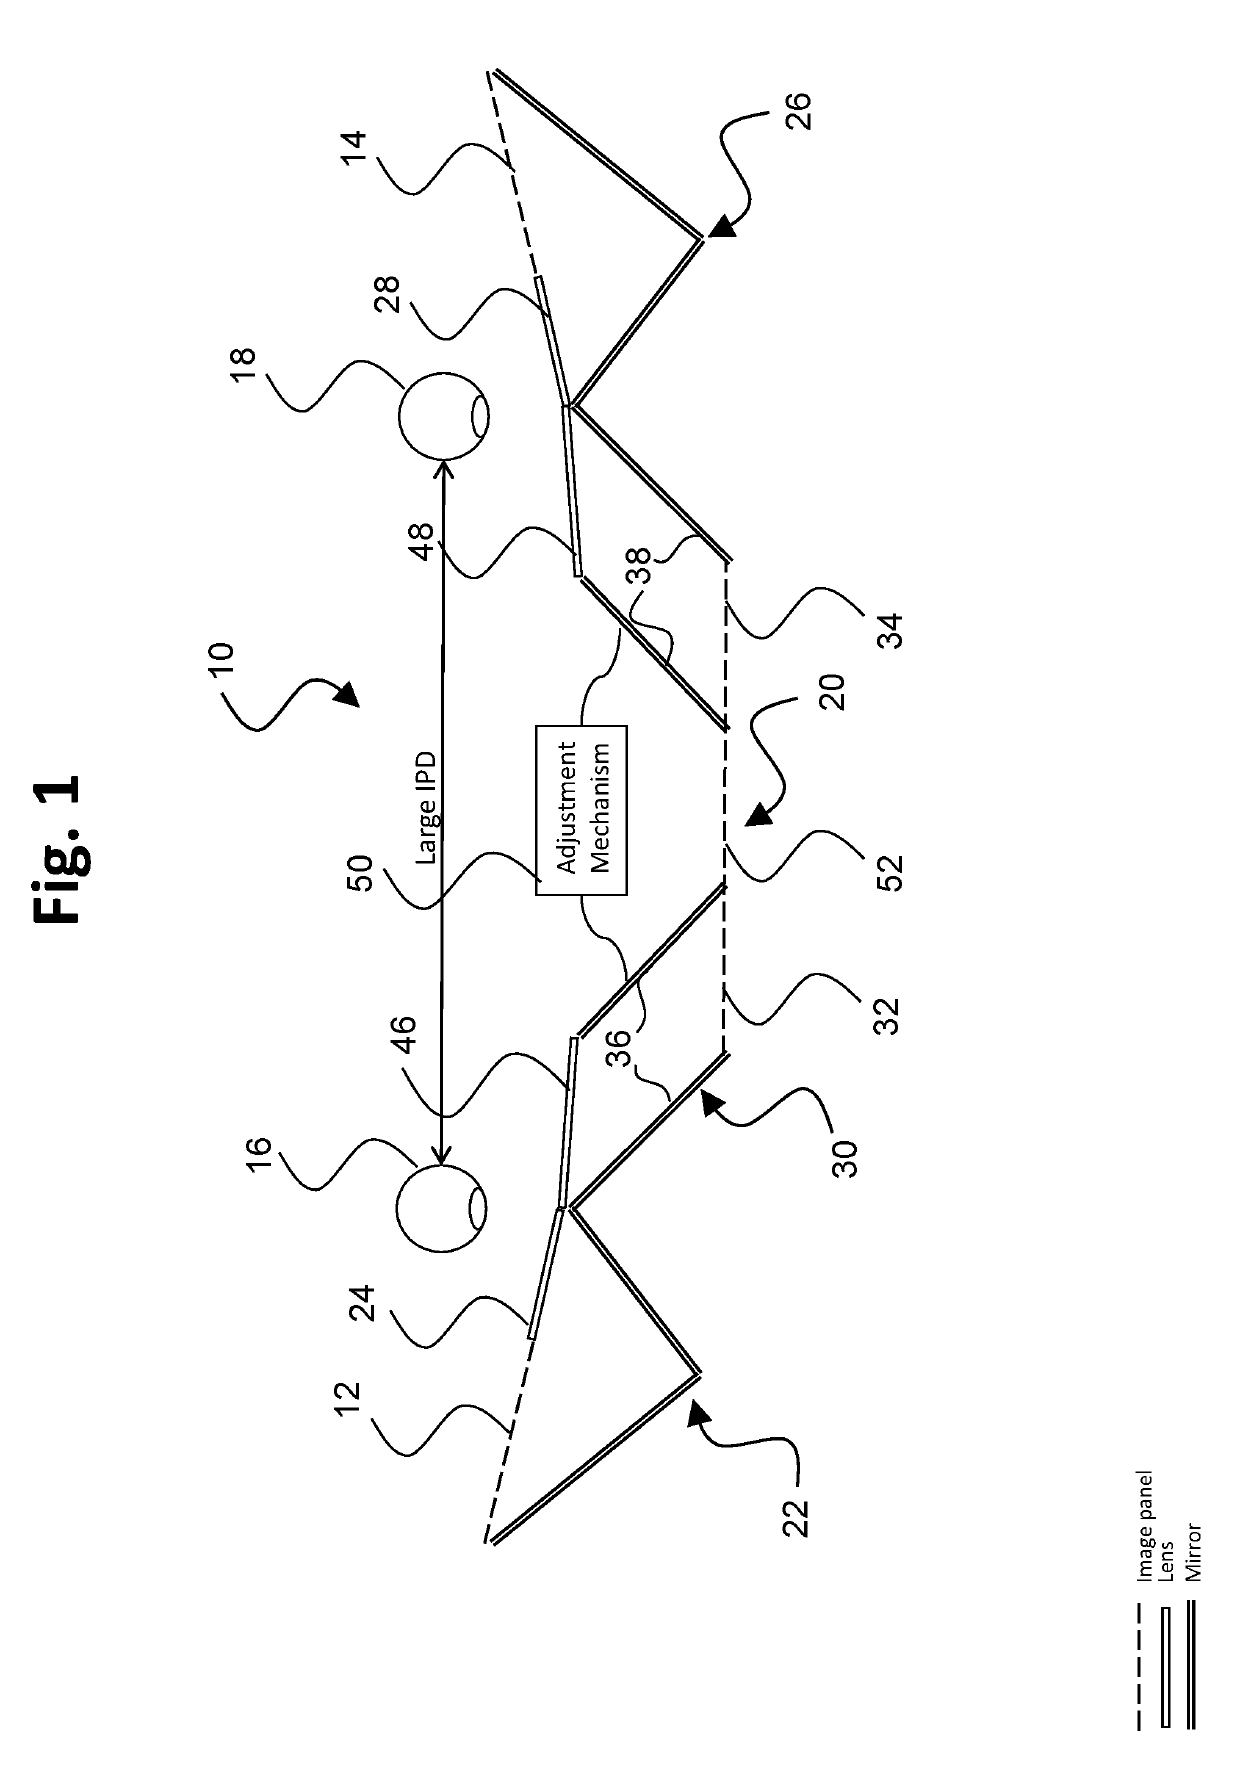 Interpupillary distance adjustment mechanism for a compact head-mounted display system